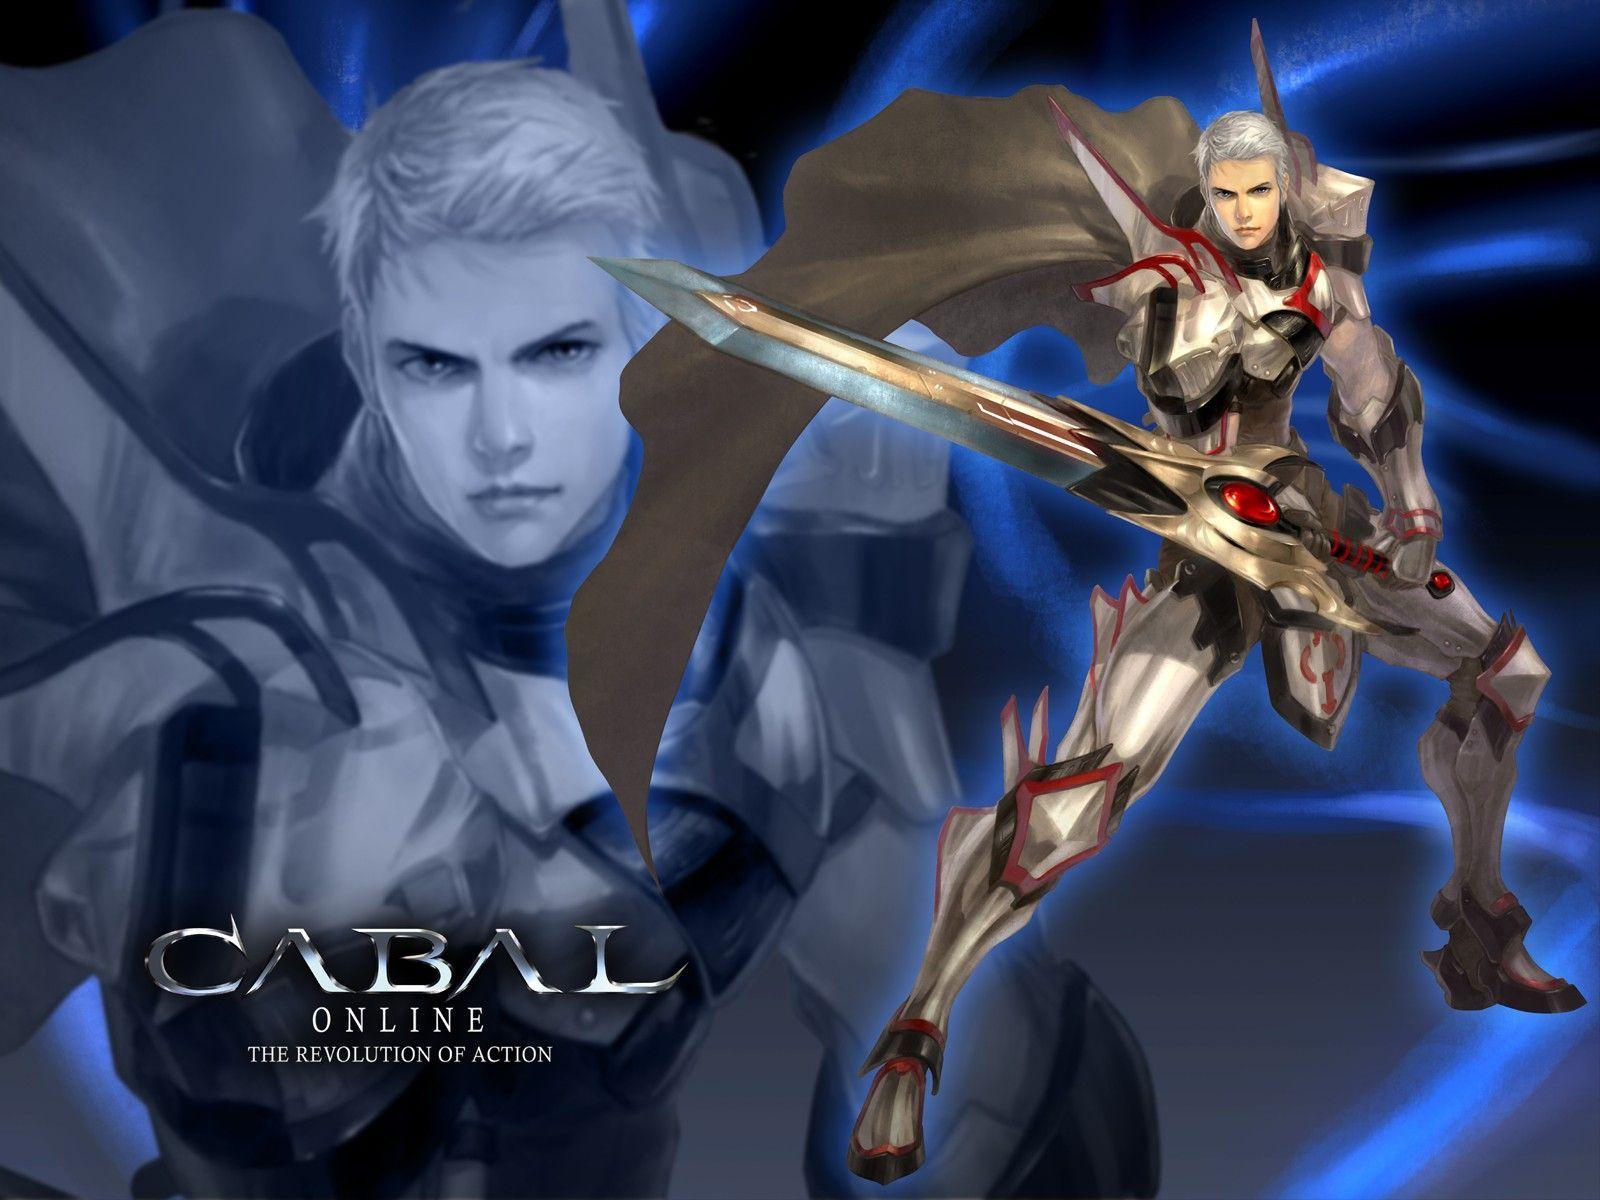 Cabal Online Game Free Wallpaper. Download cool HD wallpaper here